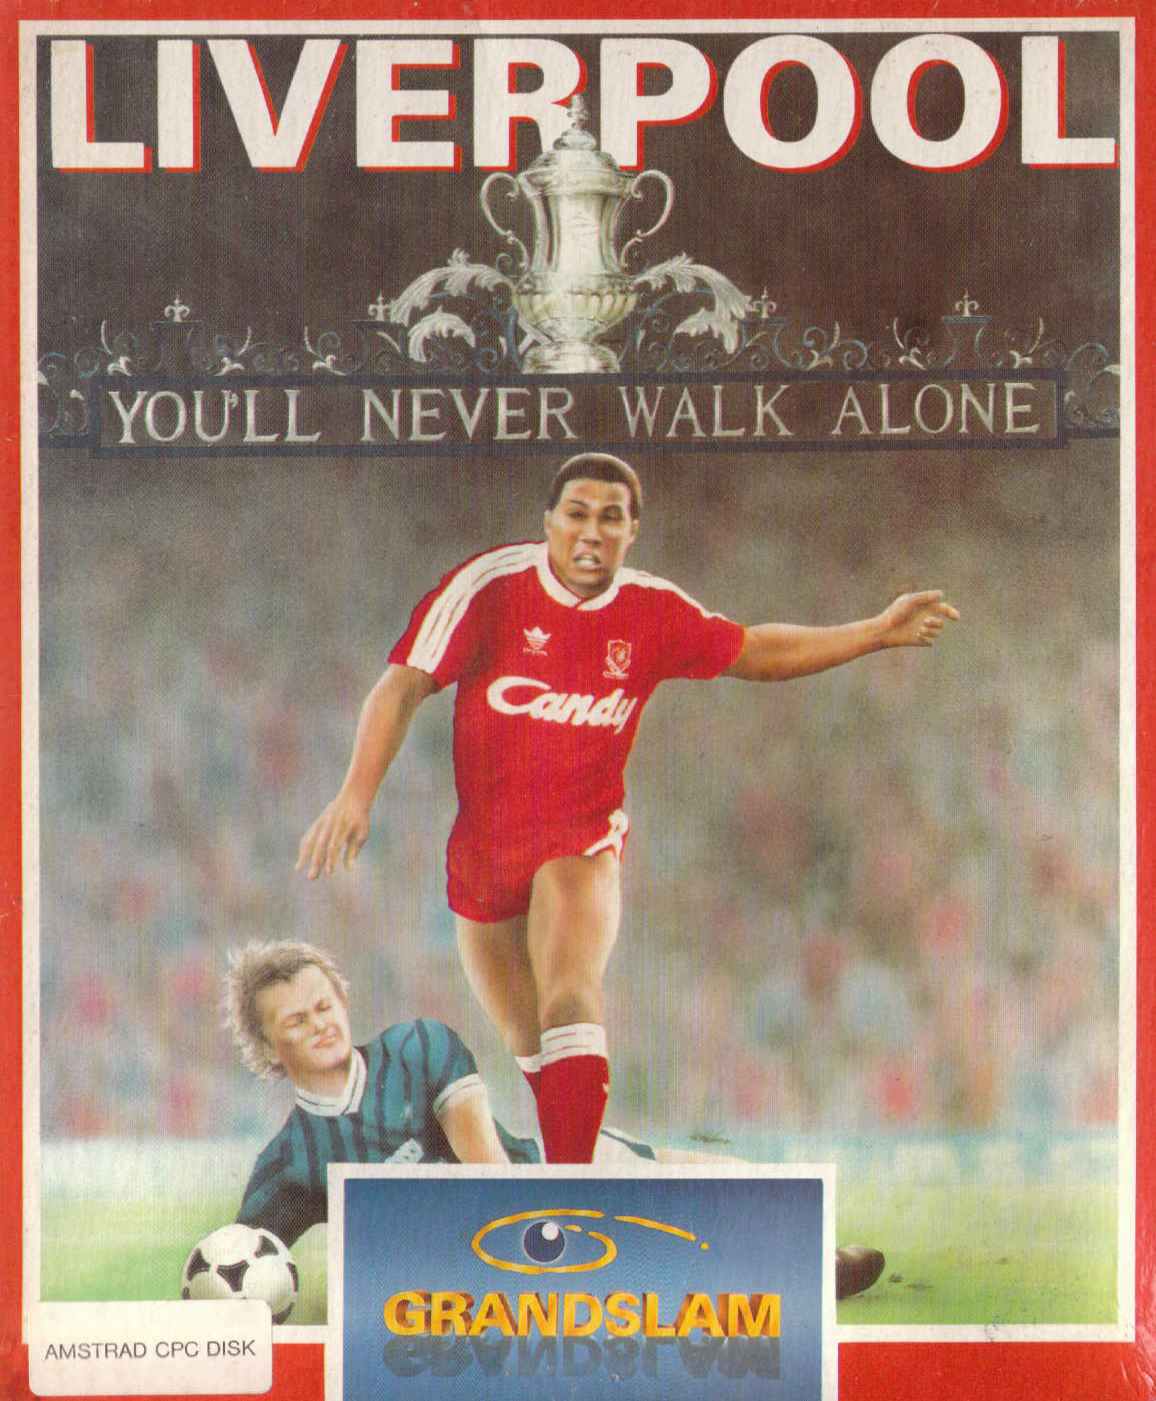 screenshot of the Amstrad CPC game Liverpool by GameBase CPC